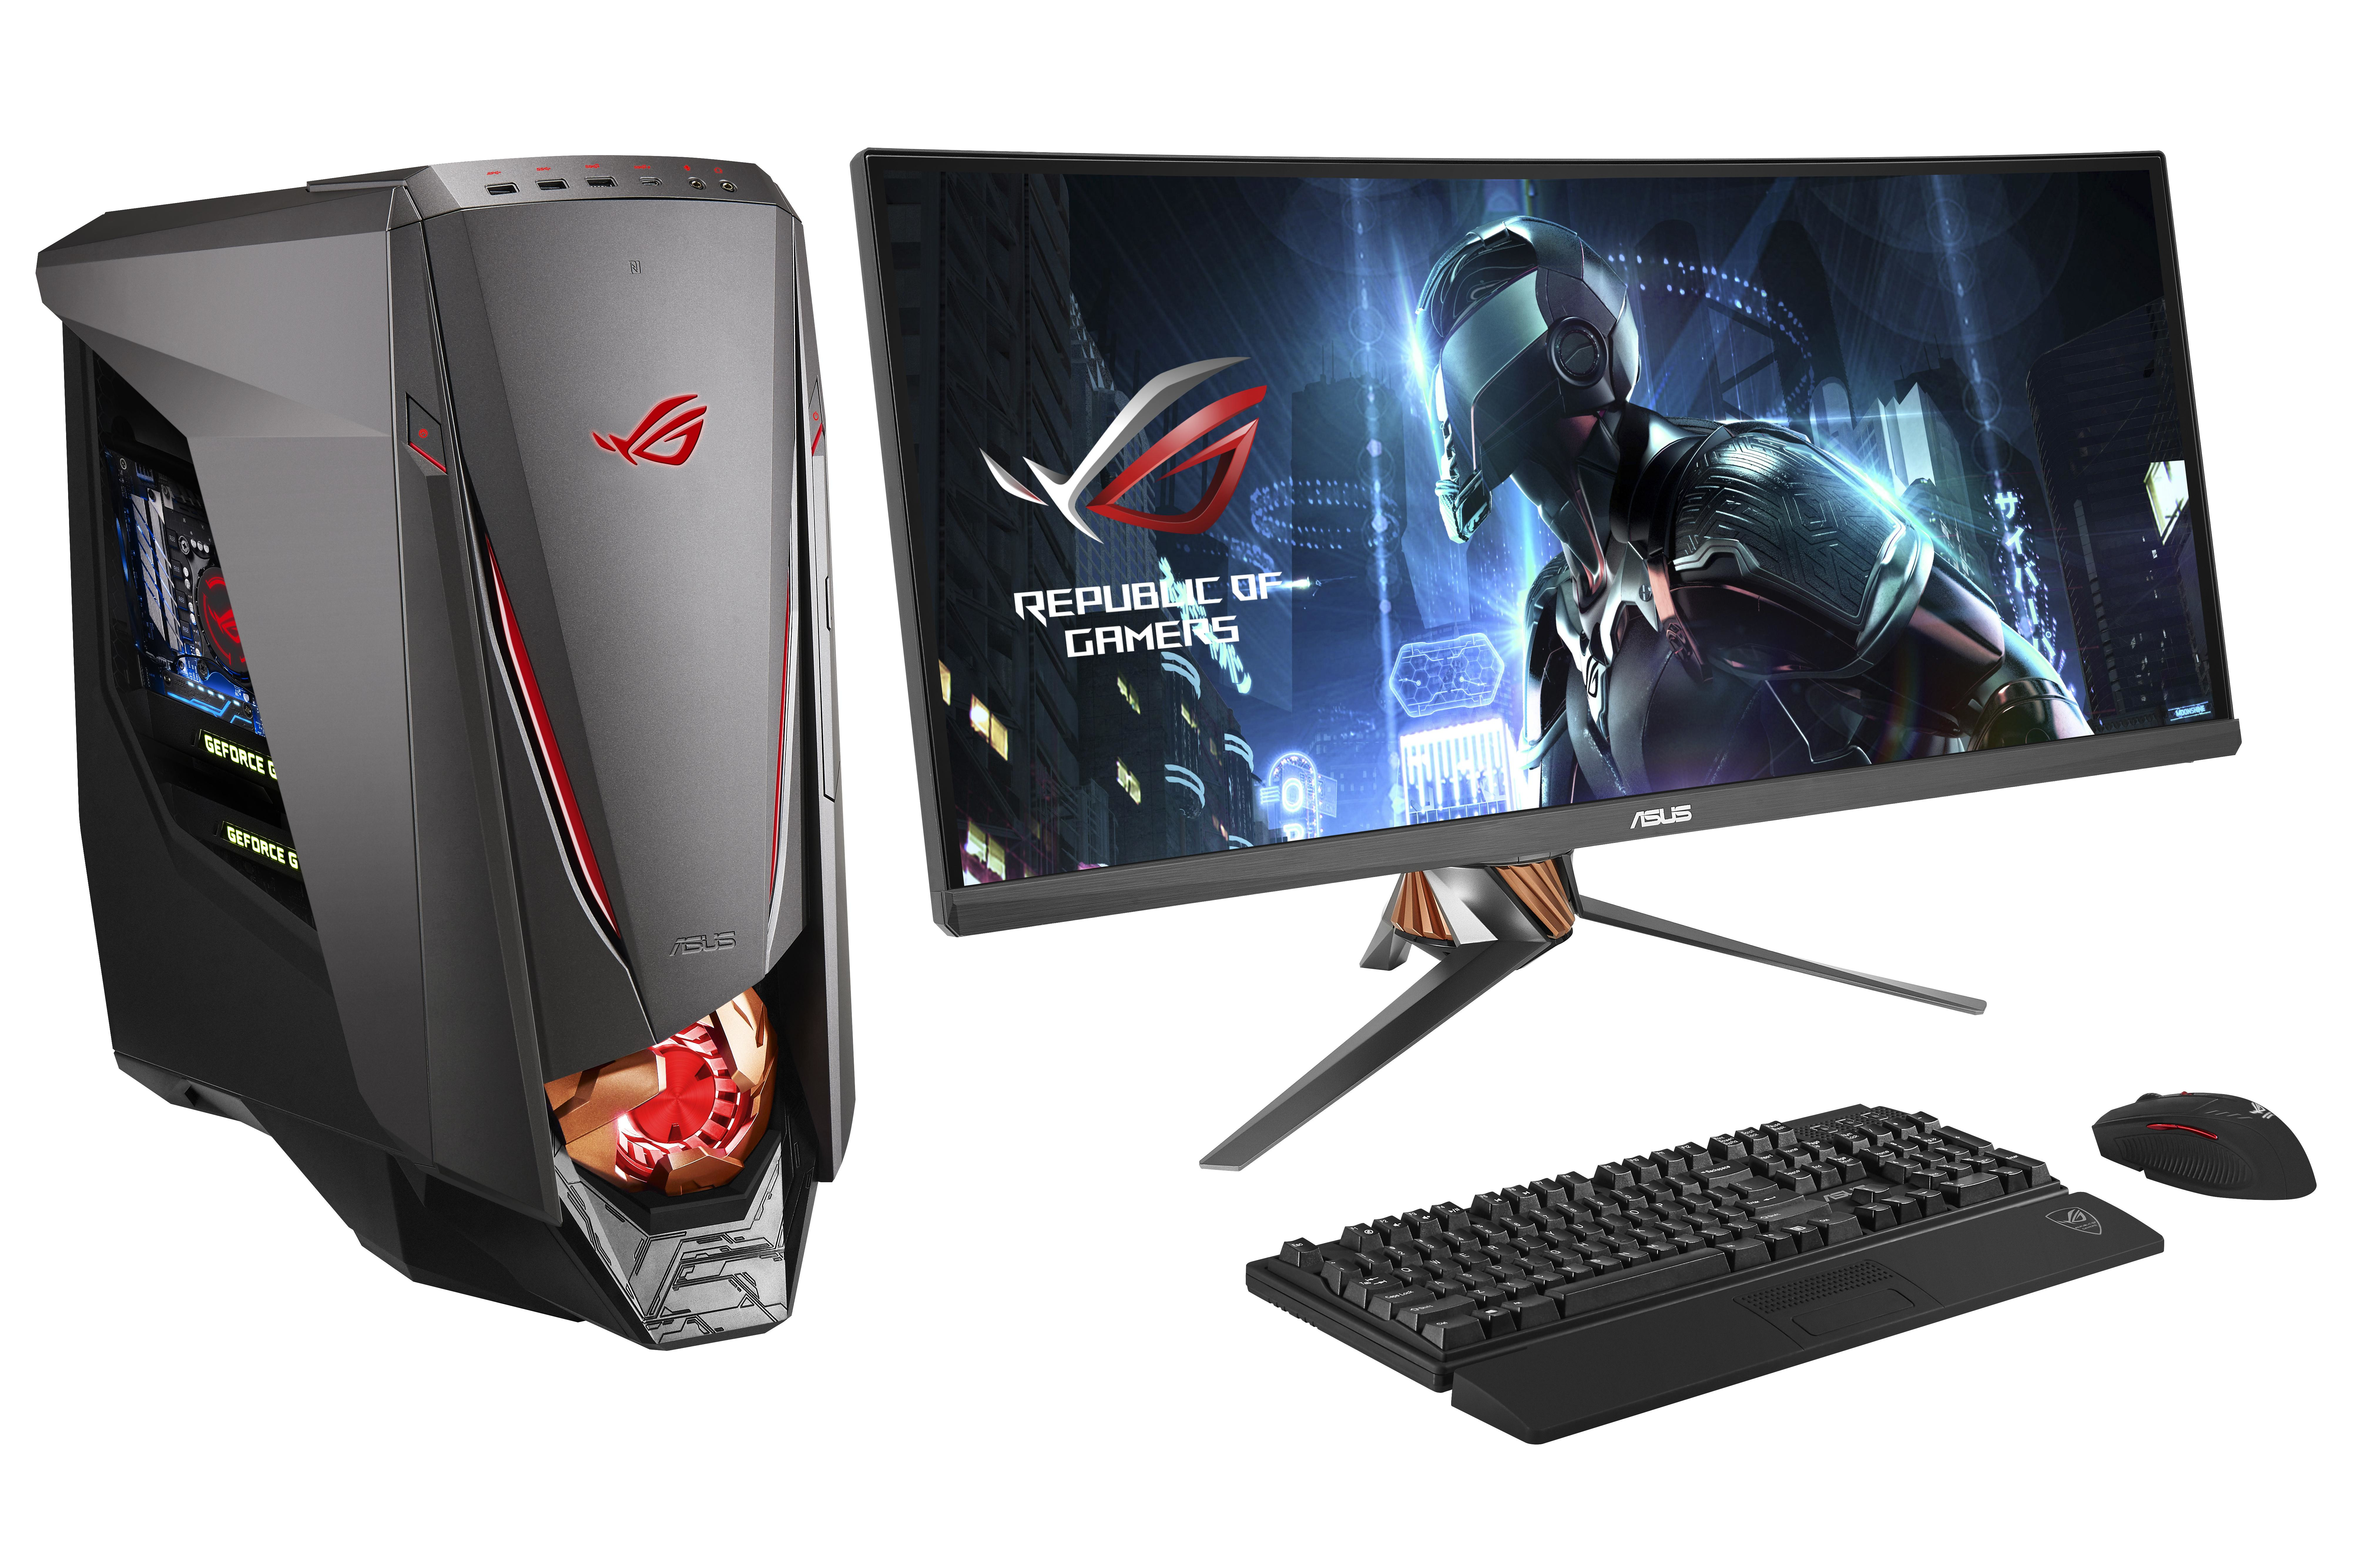 Curved Places That Sell Gaming Desktops for Small Room